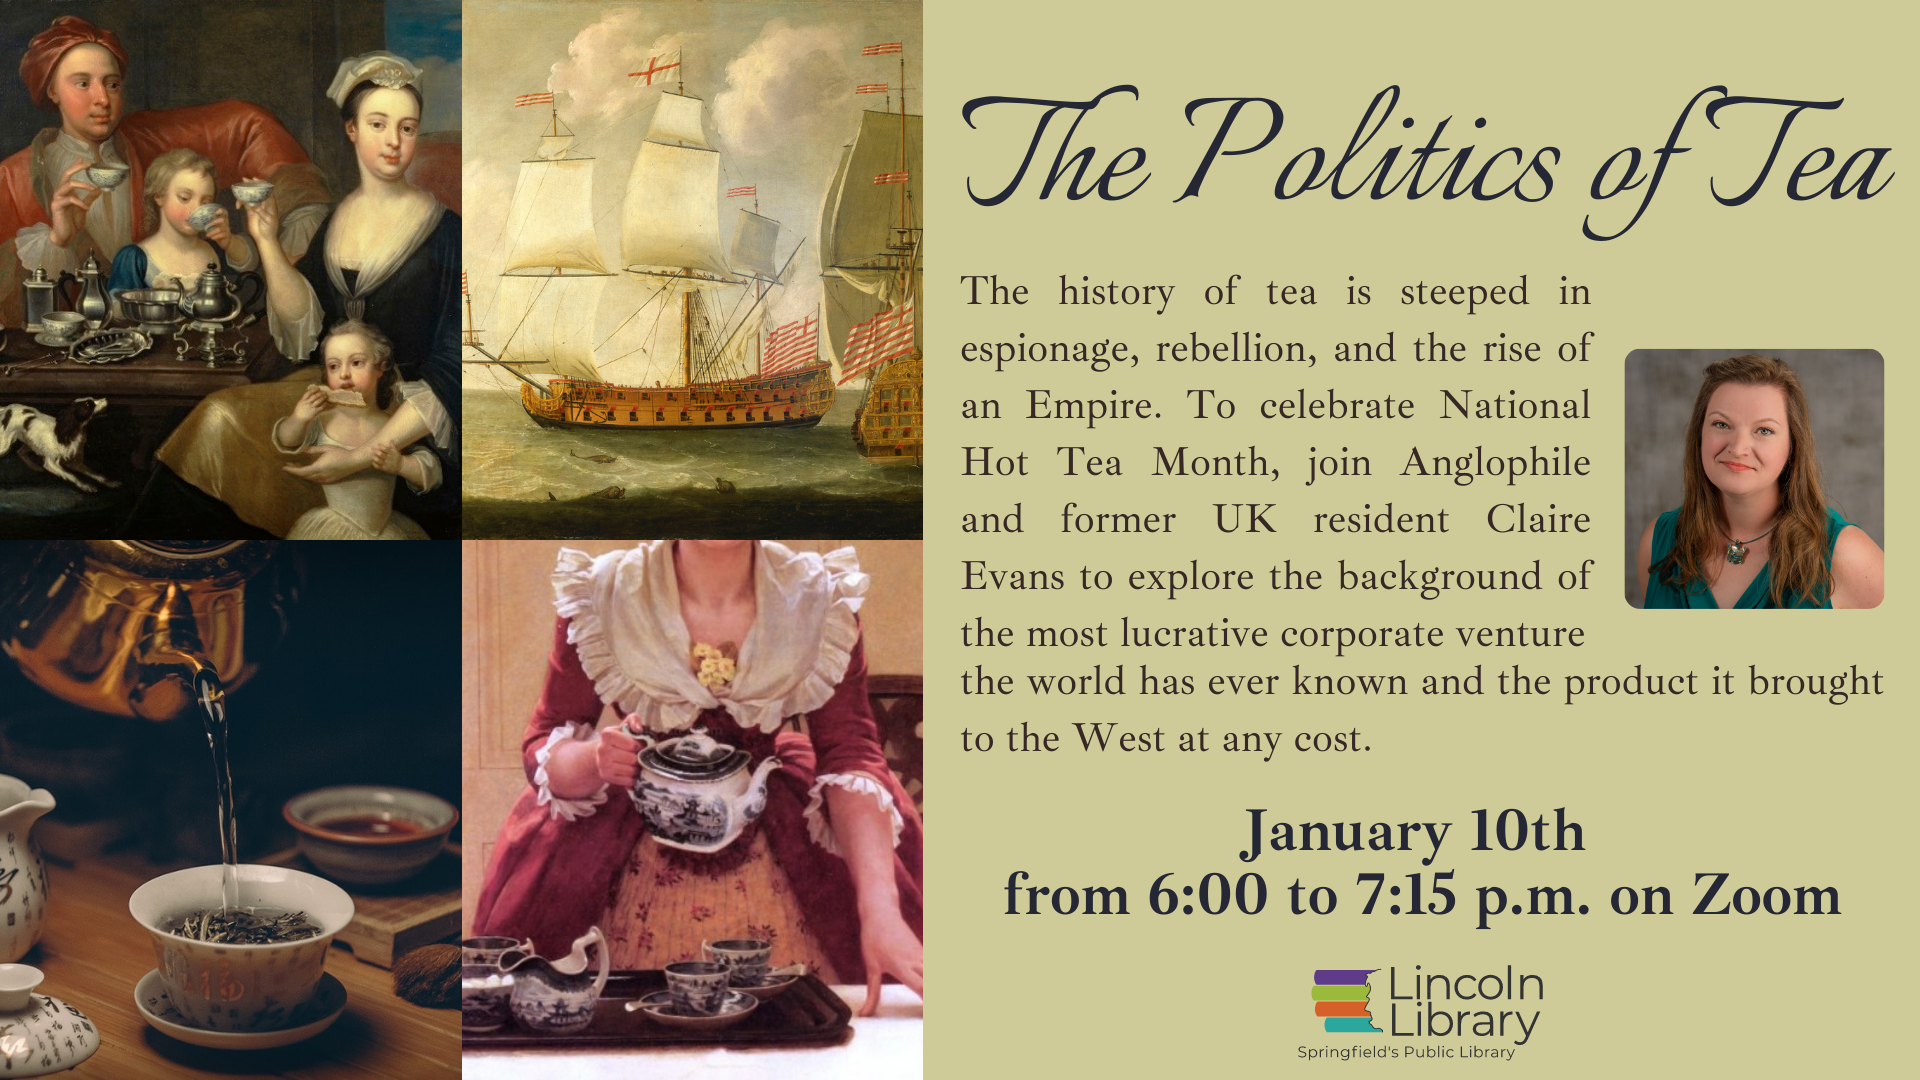 Advertisment for program "The Politics of Tea" to be held on January 10th, 2022 from 6:00 to 7:15 p.m. on Zoom